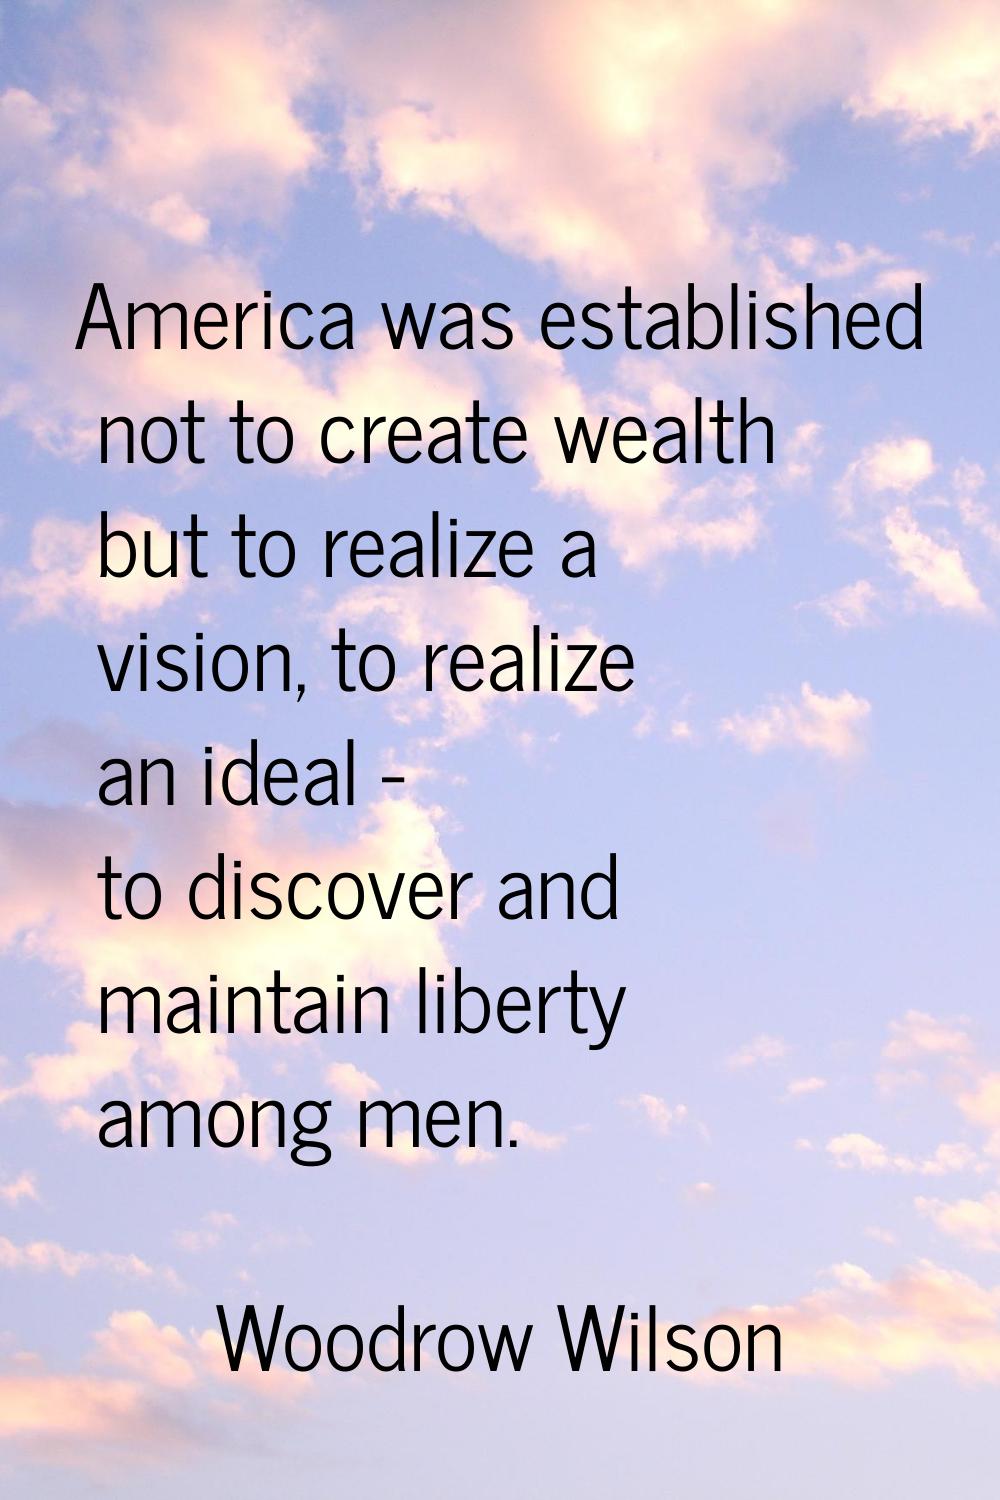 America was established not to create wealth but to realize a vision, to realize an ideal - to disc